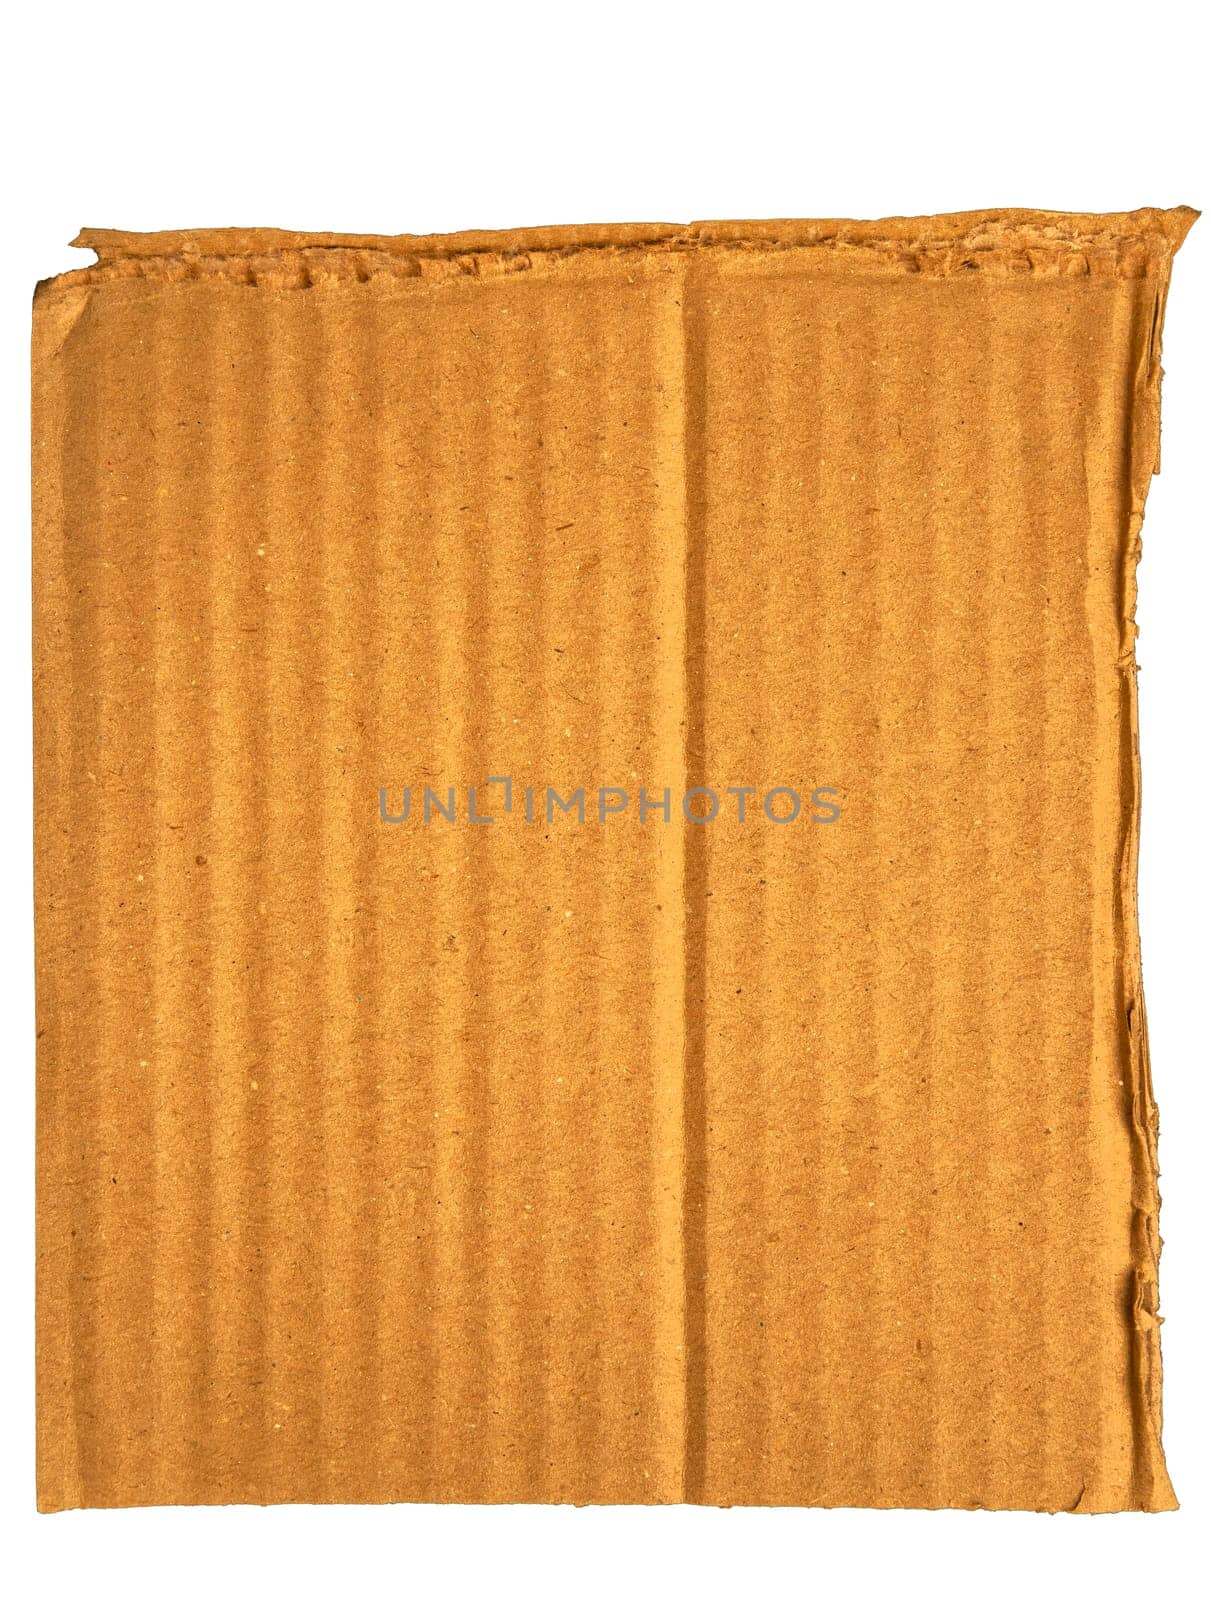 Cardboard Pieces Textured Background. Carton Piece, Ripped Kraft Paper Wallpaper, Brown Wrapping Vintage Paper Isolated Top View